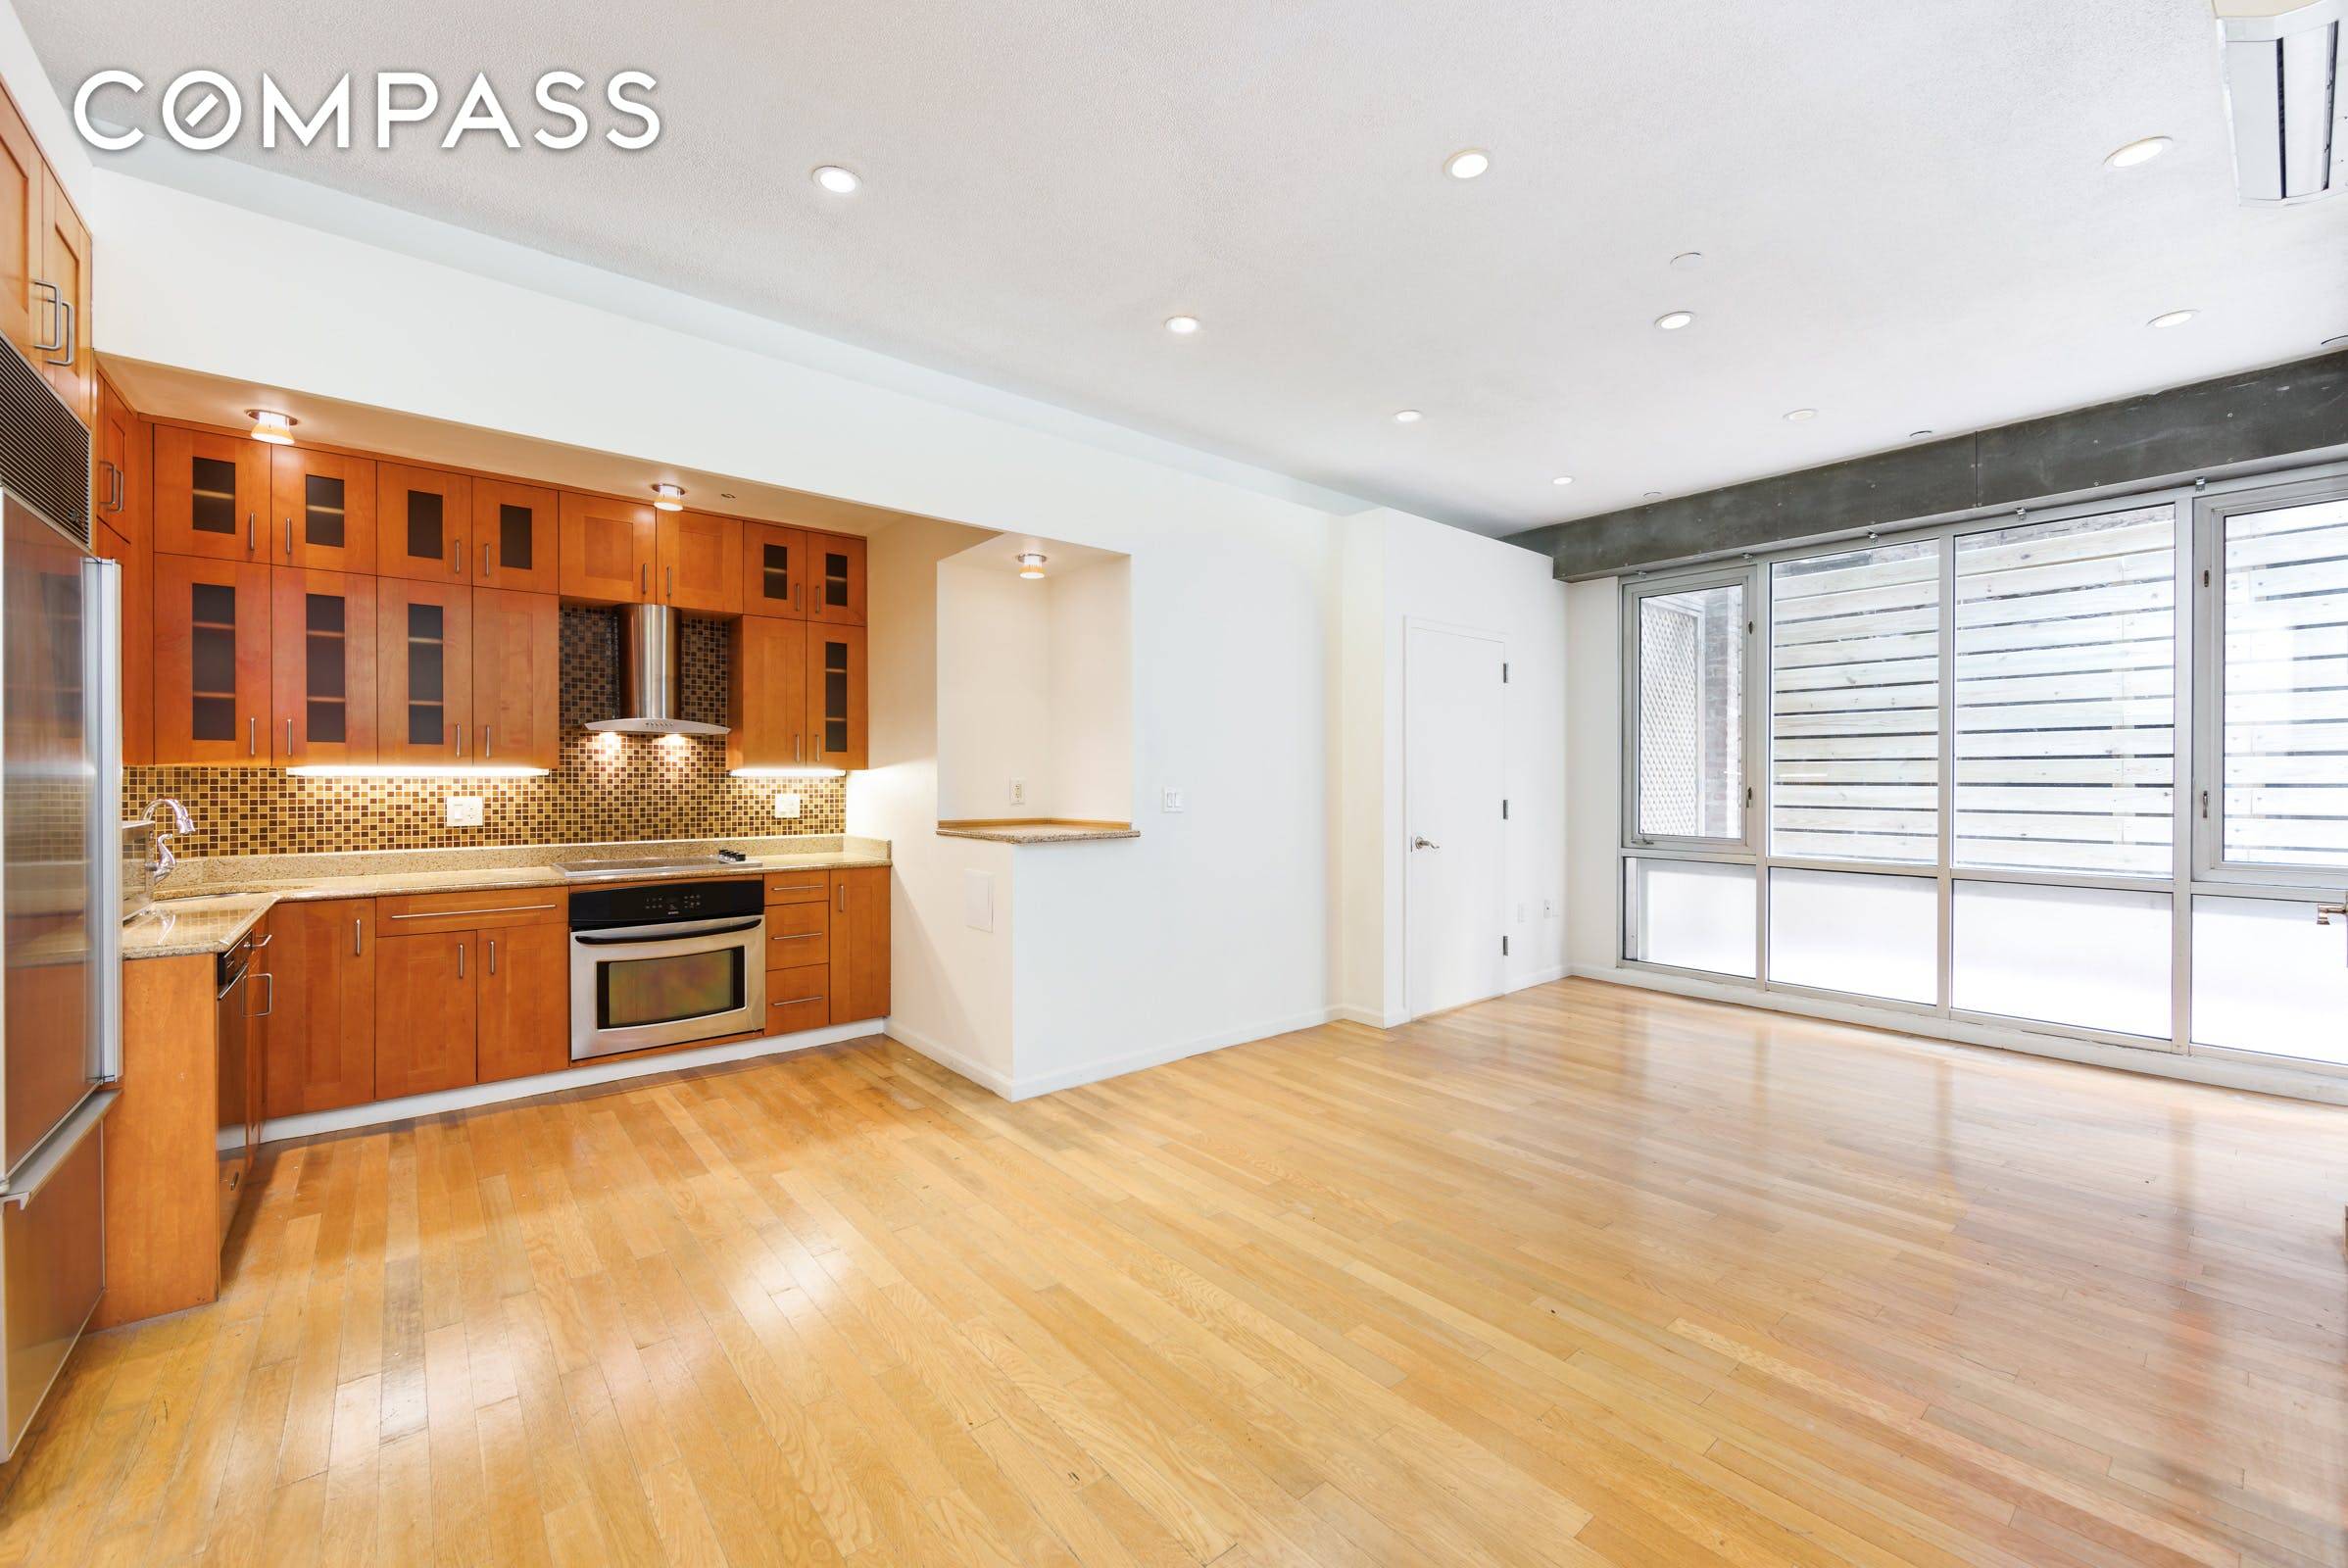 Legal Live Work One bedroom Duplex for rent on iconic Tribeca Block.